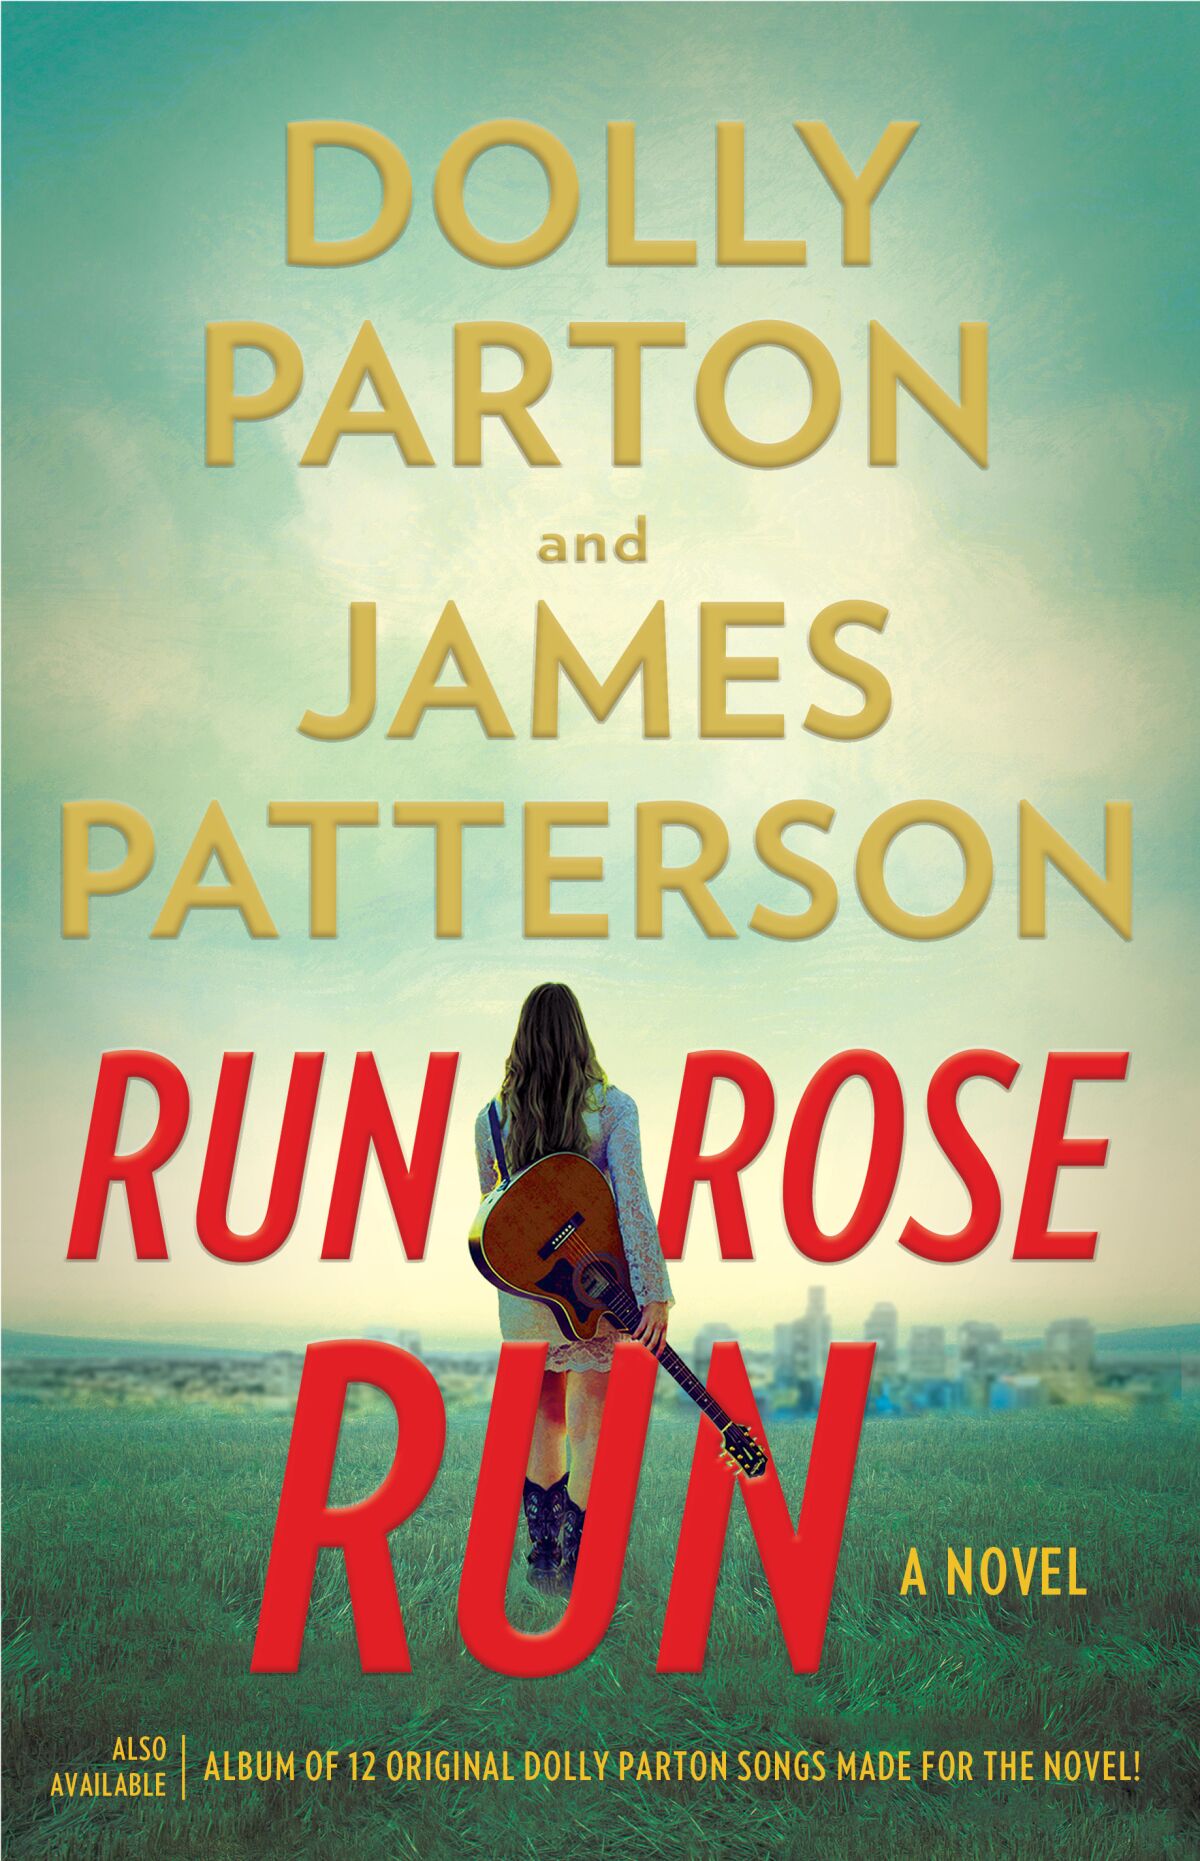 A book jacket for Dolly Parton and James Patterson "Run Rose Run." Credit: Little, Brown and Company